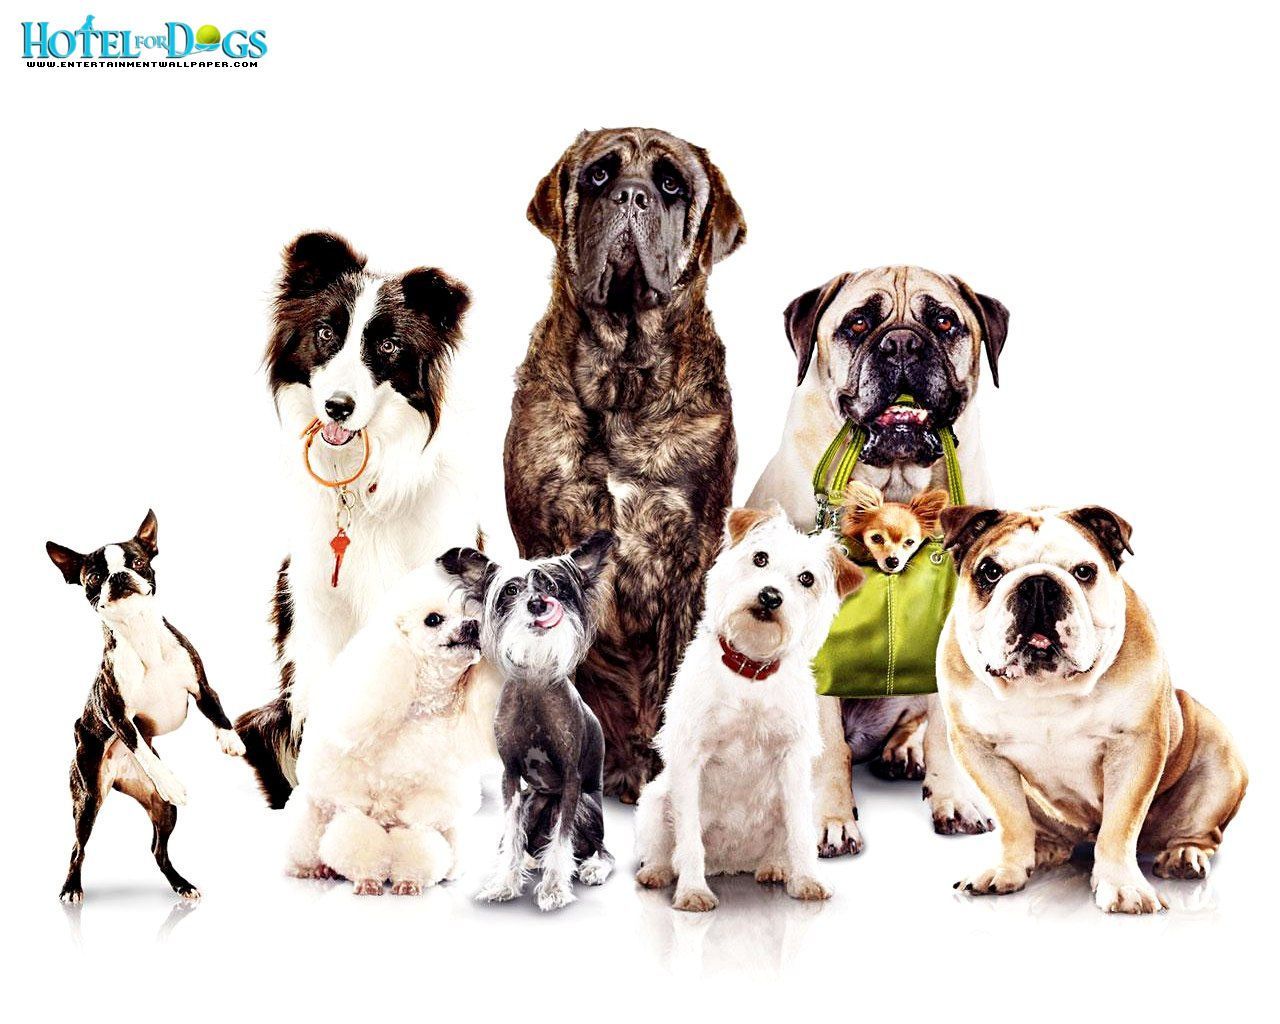 desktop wallpaper picture of dogs. Dog hotel, Dog friends, Dogs